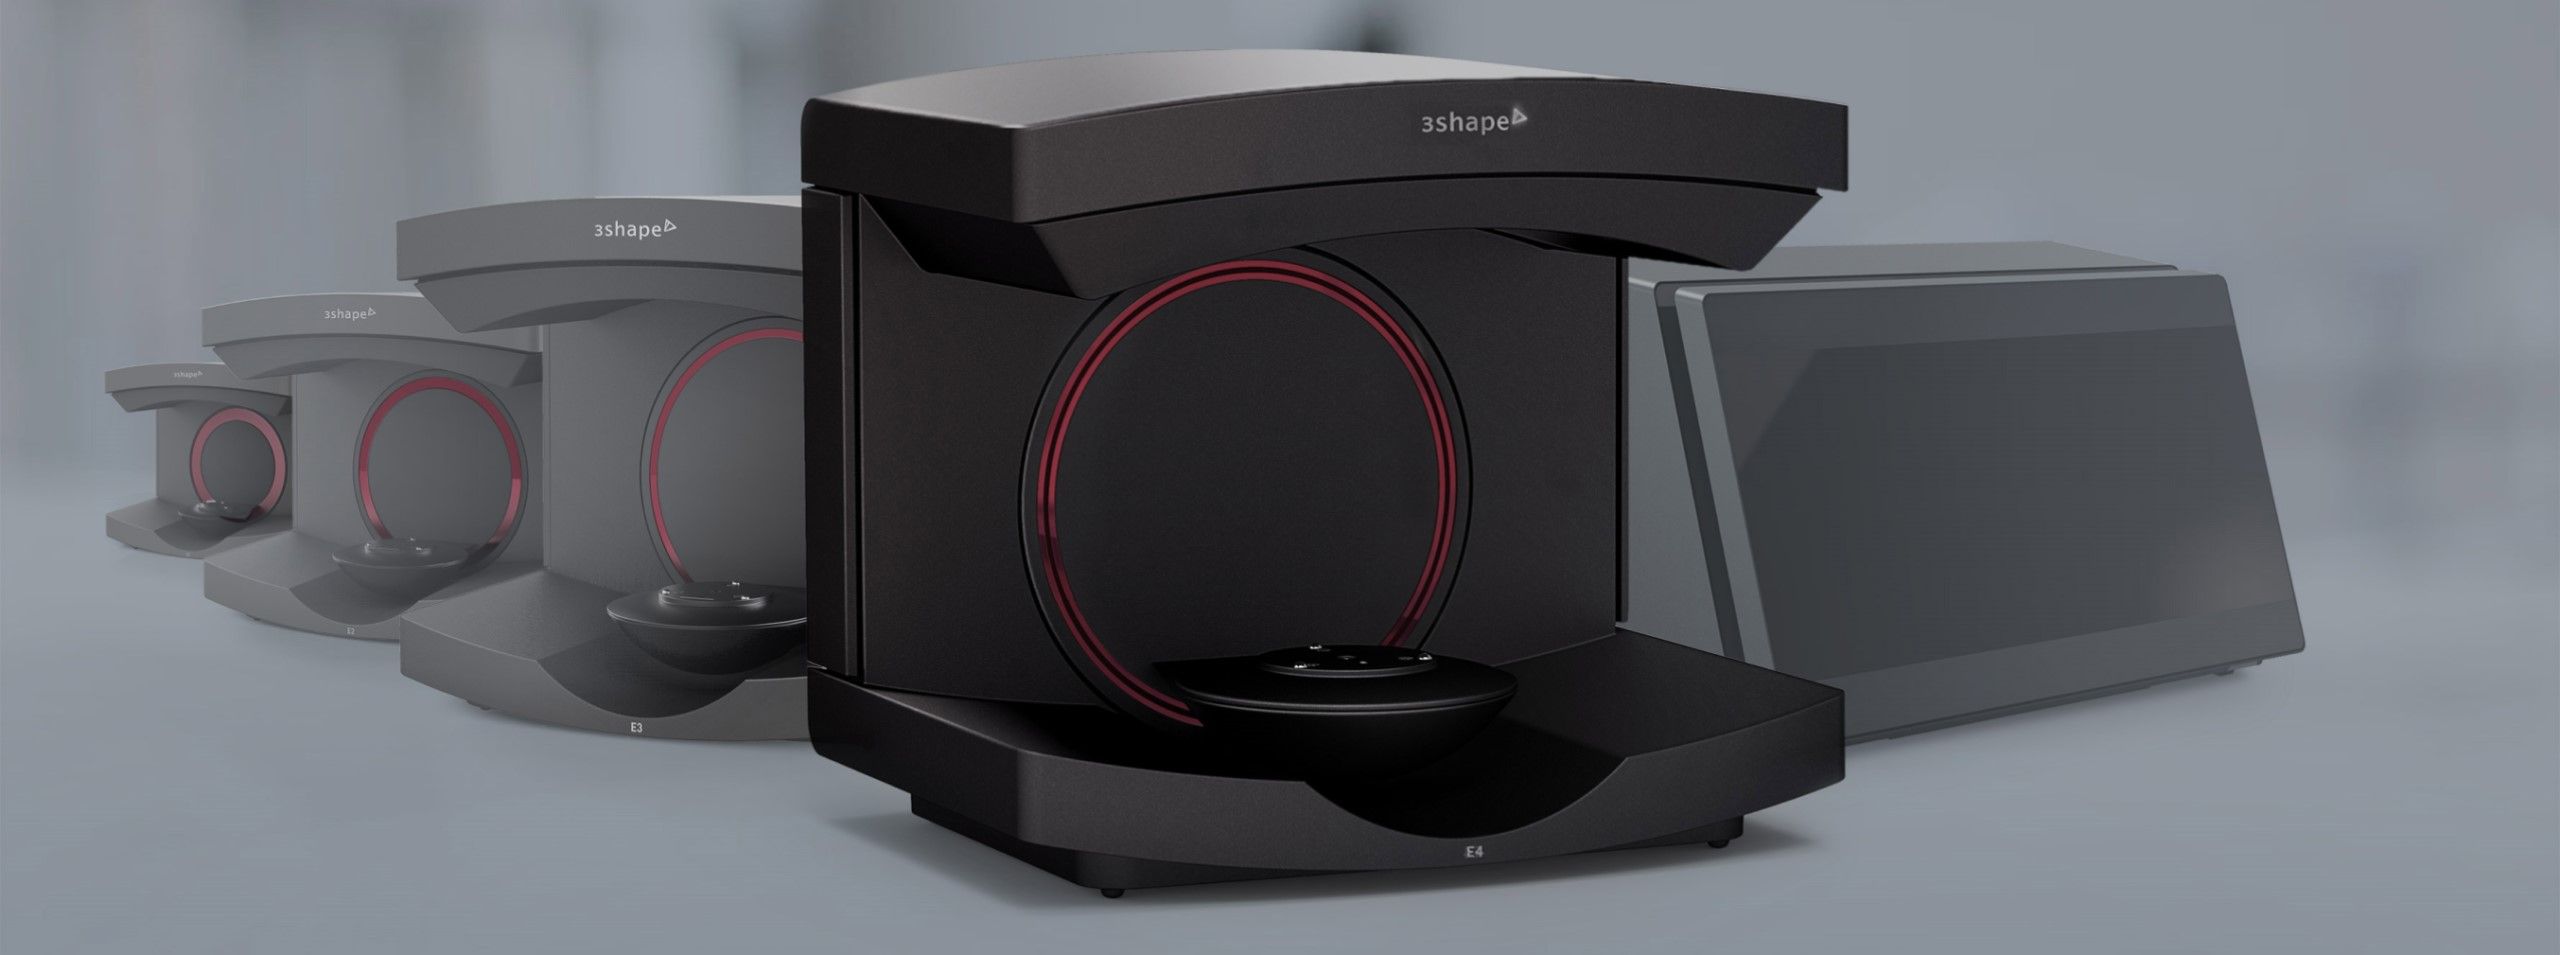 trade-up offer for 3shape lab scanners